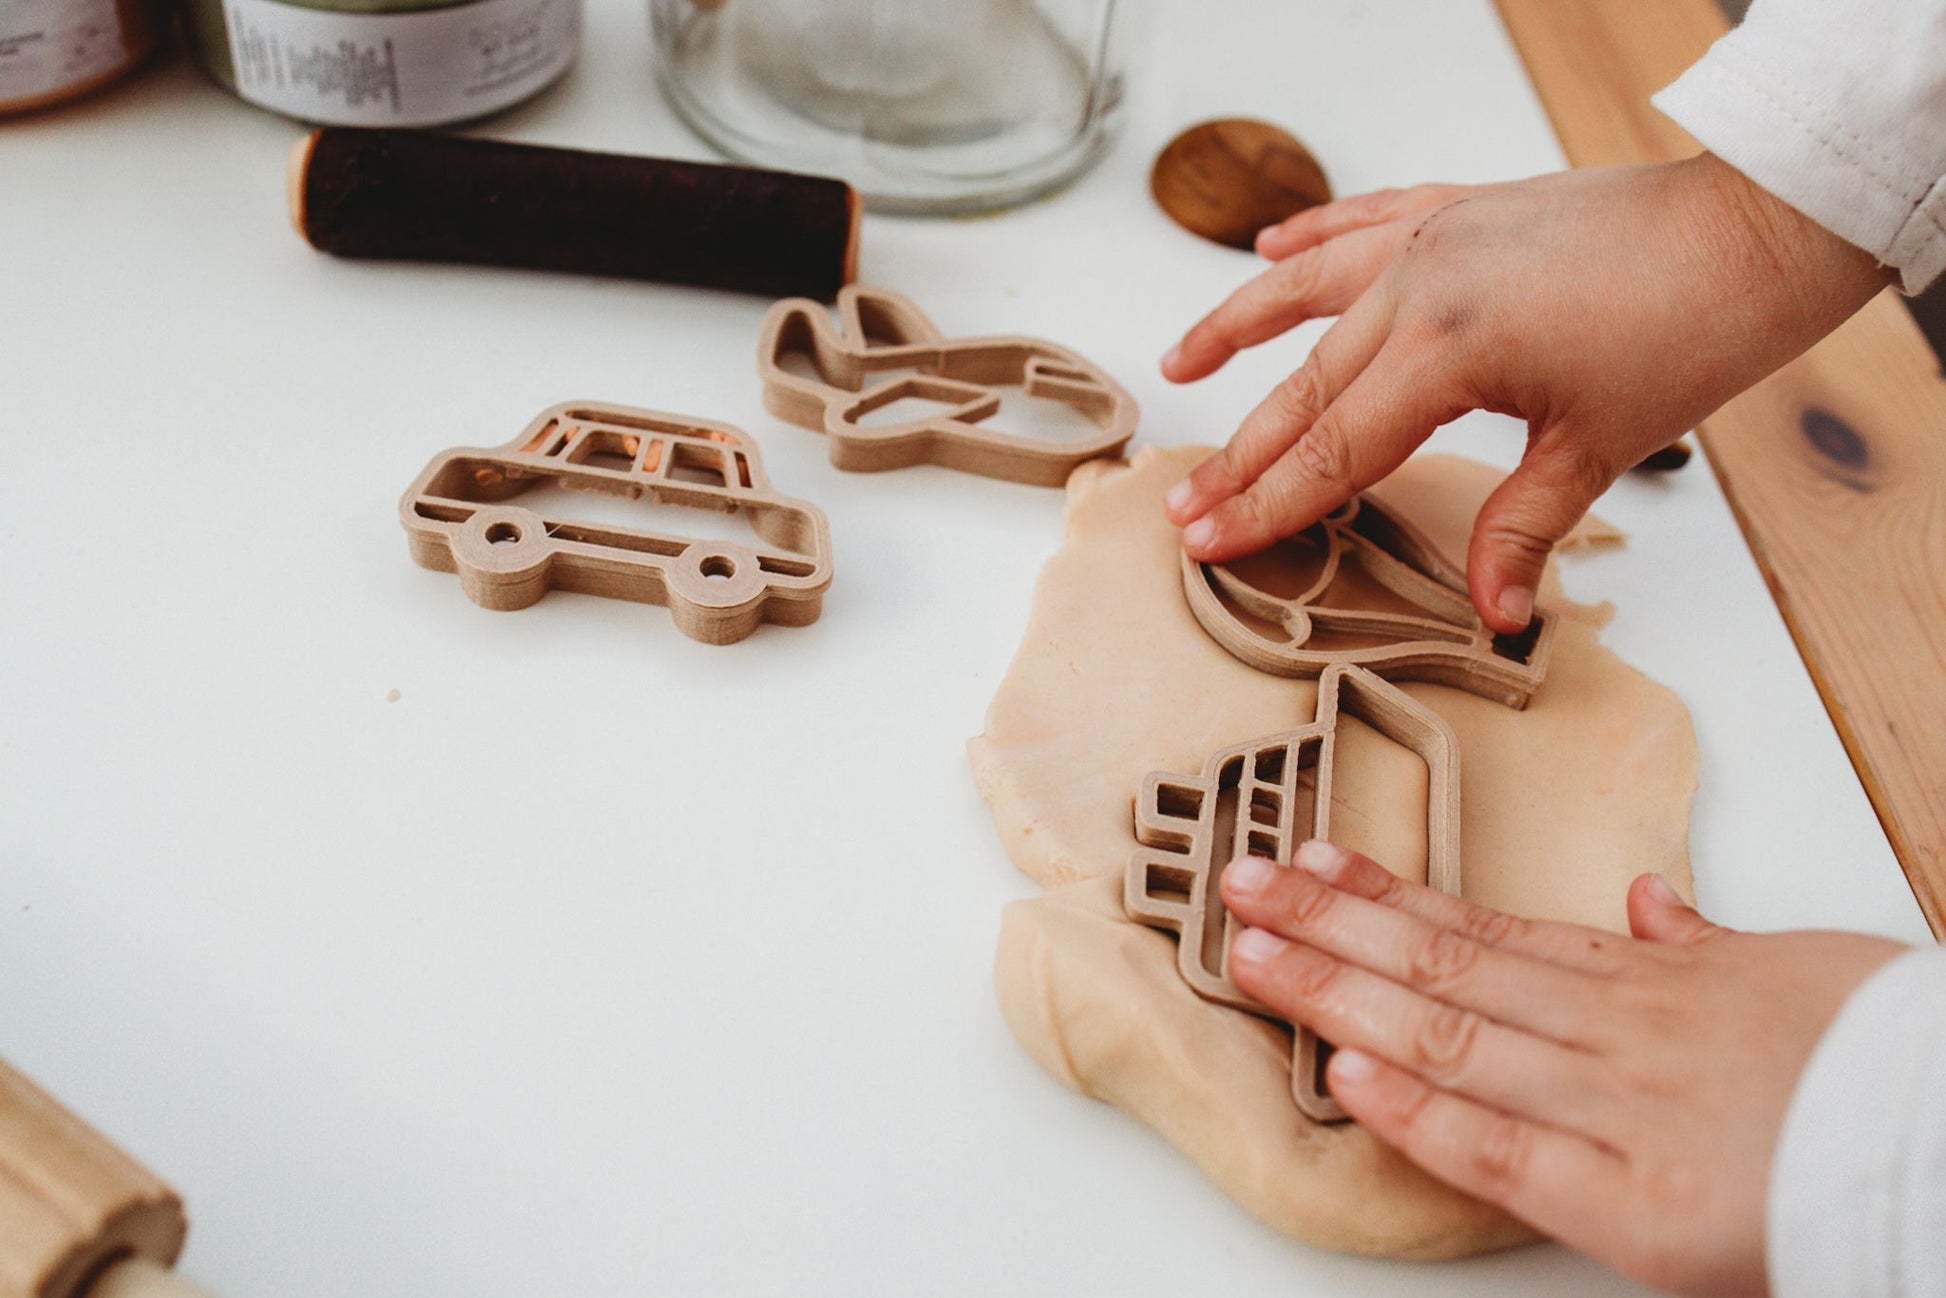 Kinfolk Pantry eco playdough cutters - a set of 6 transport themed biodegradable cutters for kids arts and crafts. Image shows a toddler using the cutters to make playdough shapes of the boat and hot air balloon with the car and plane cutters in the background.